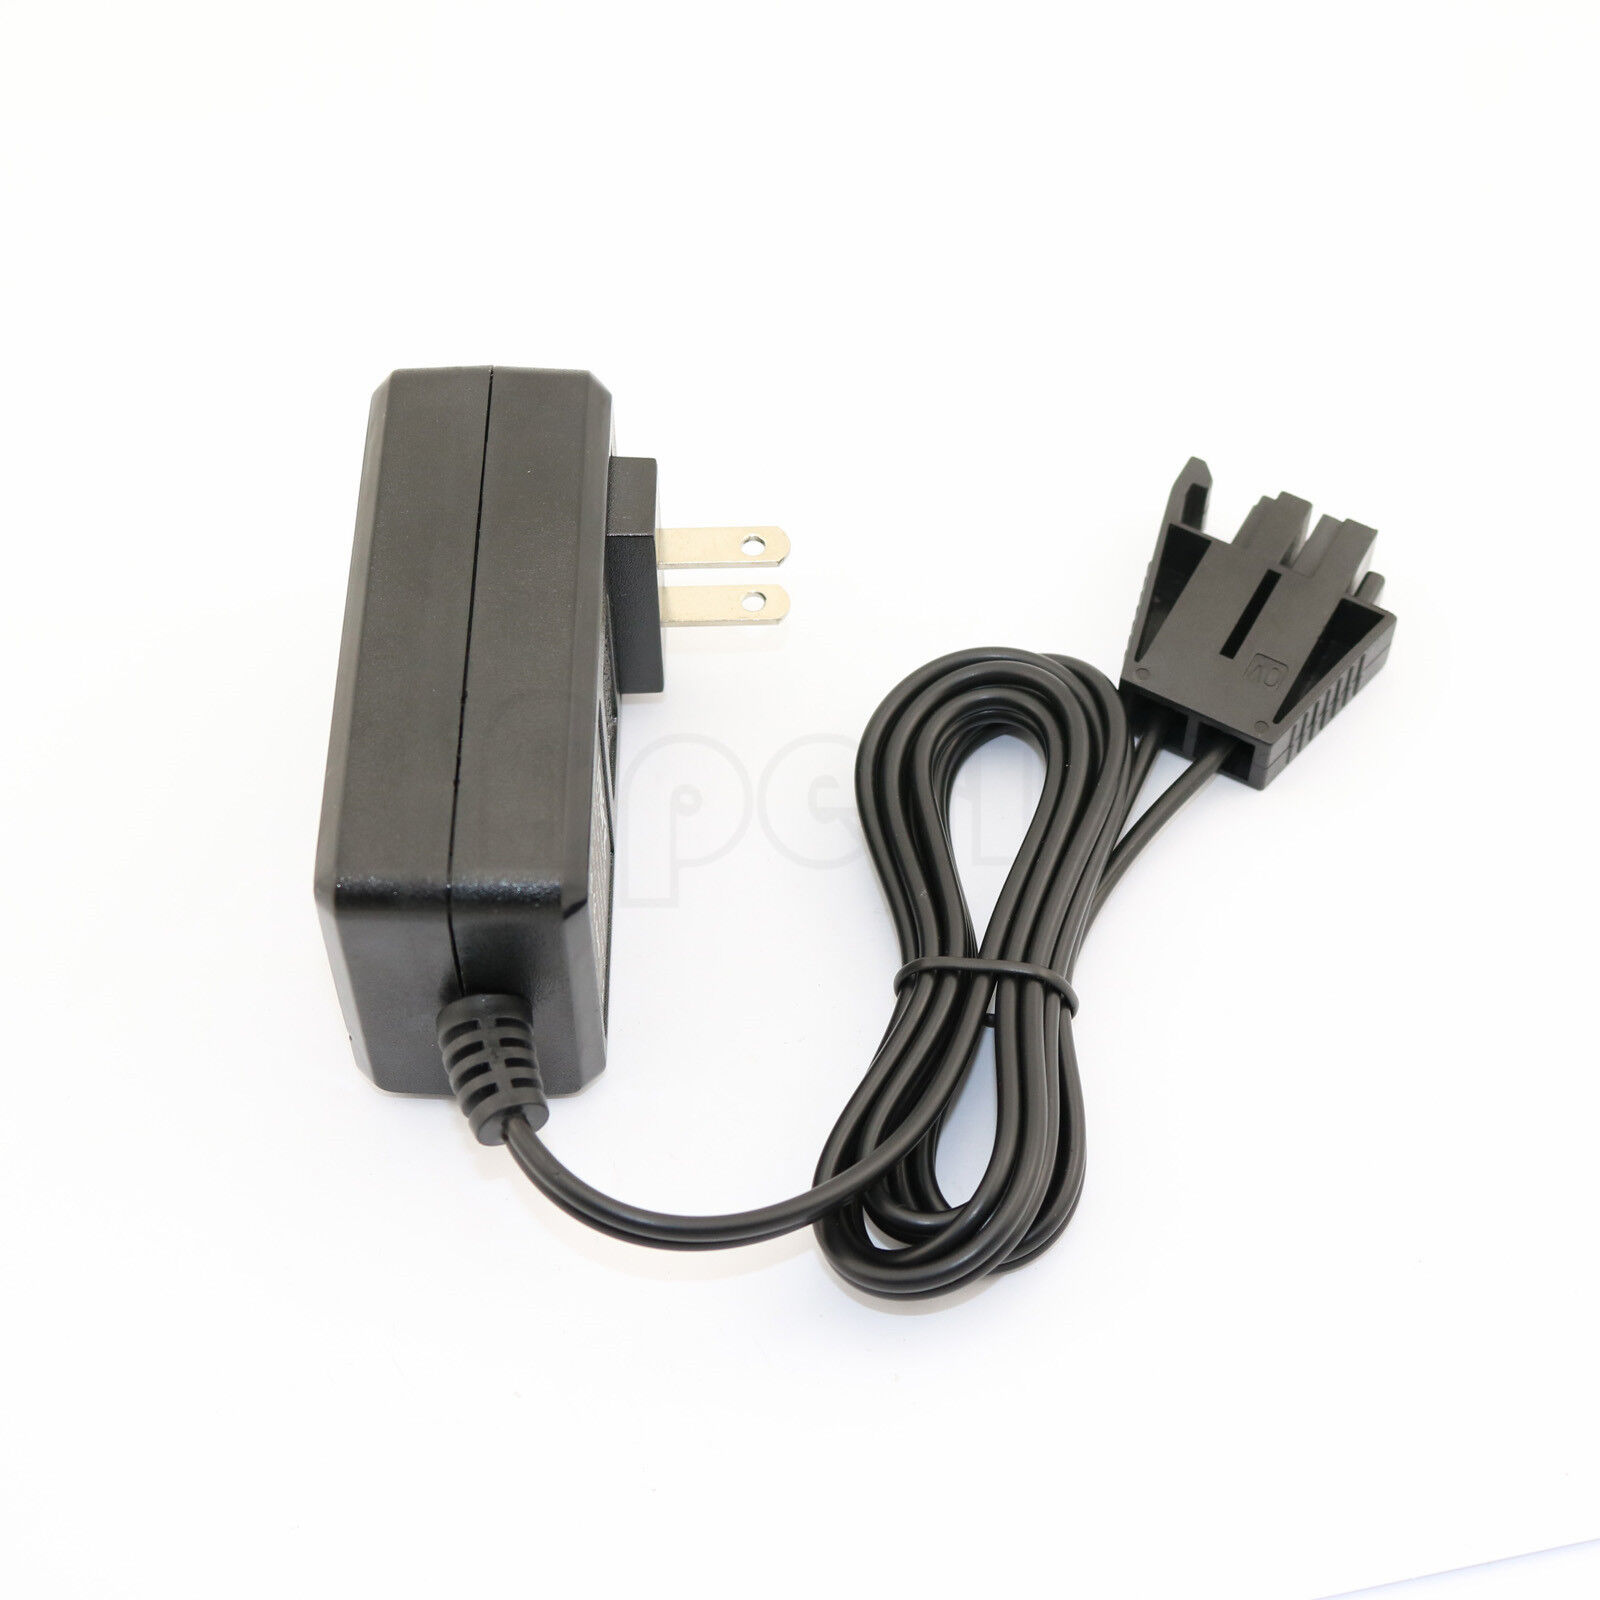 *Brand NEW*BATTERY CHARGER For PEG PEREGO RIDE ON TOYS 6 VOLT 6 V AC POWER ADAPTER